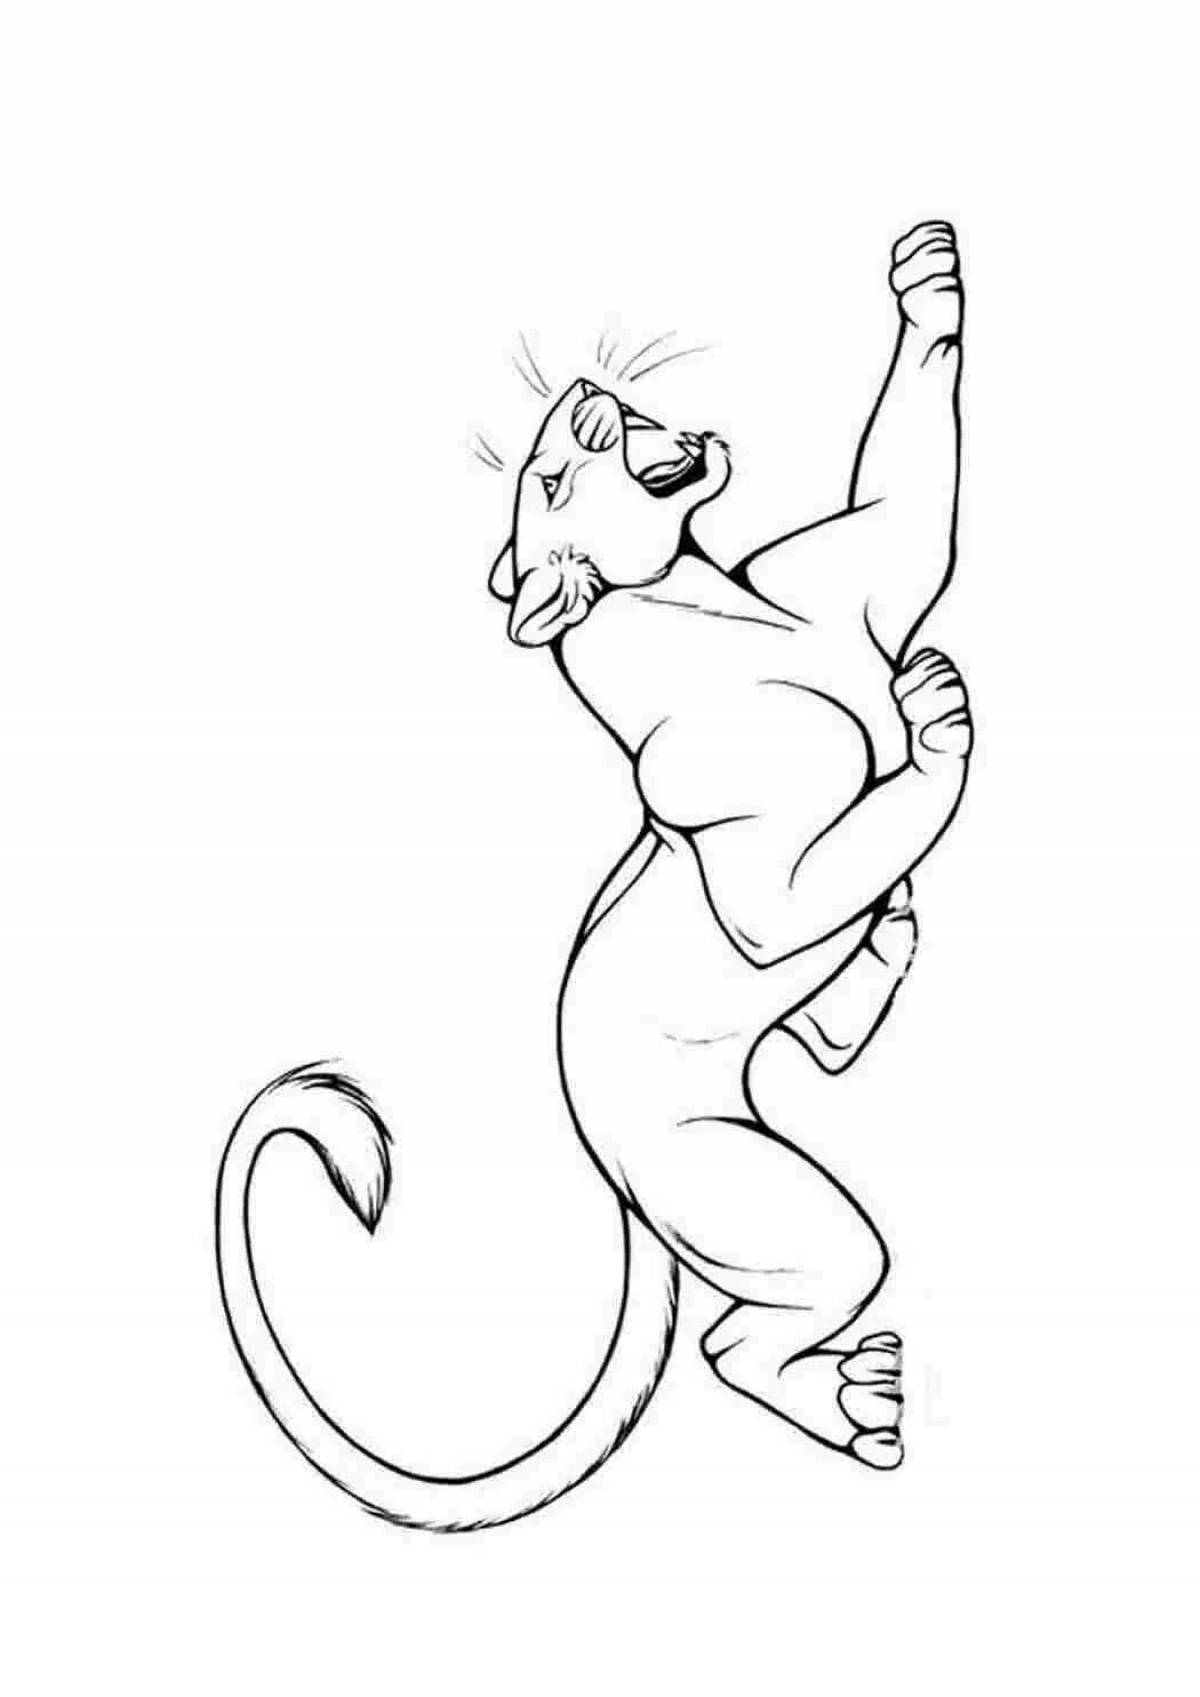 Charming panther coloring book